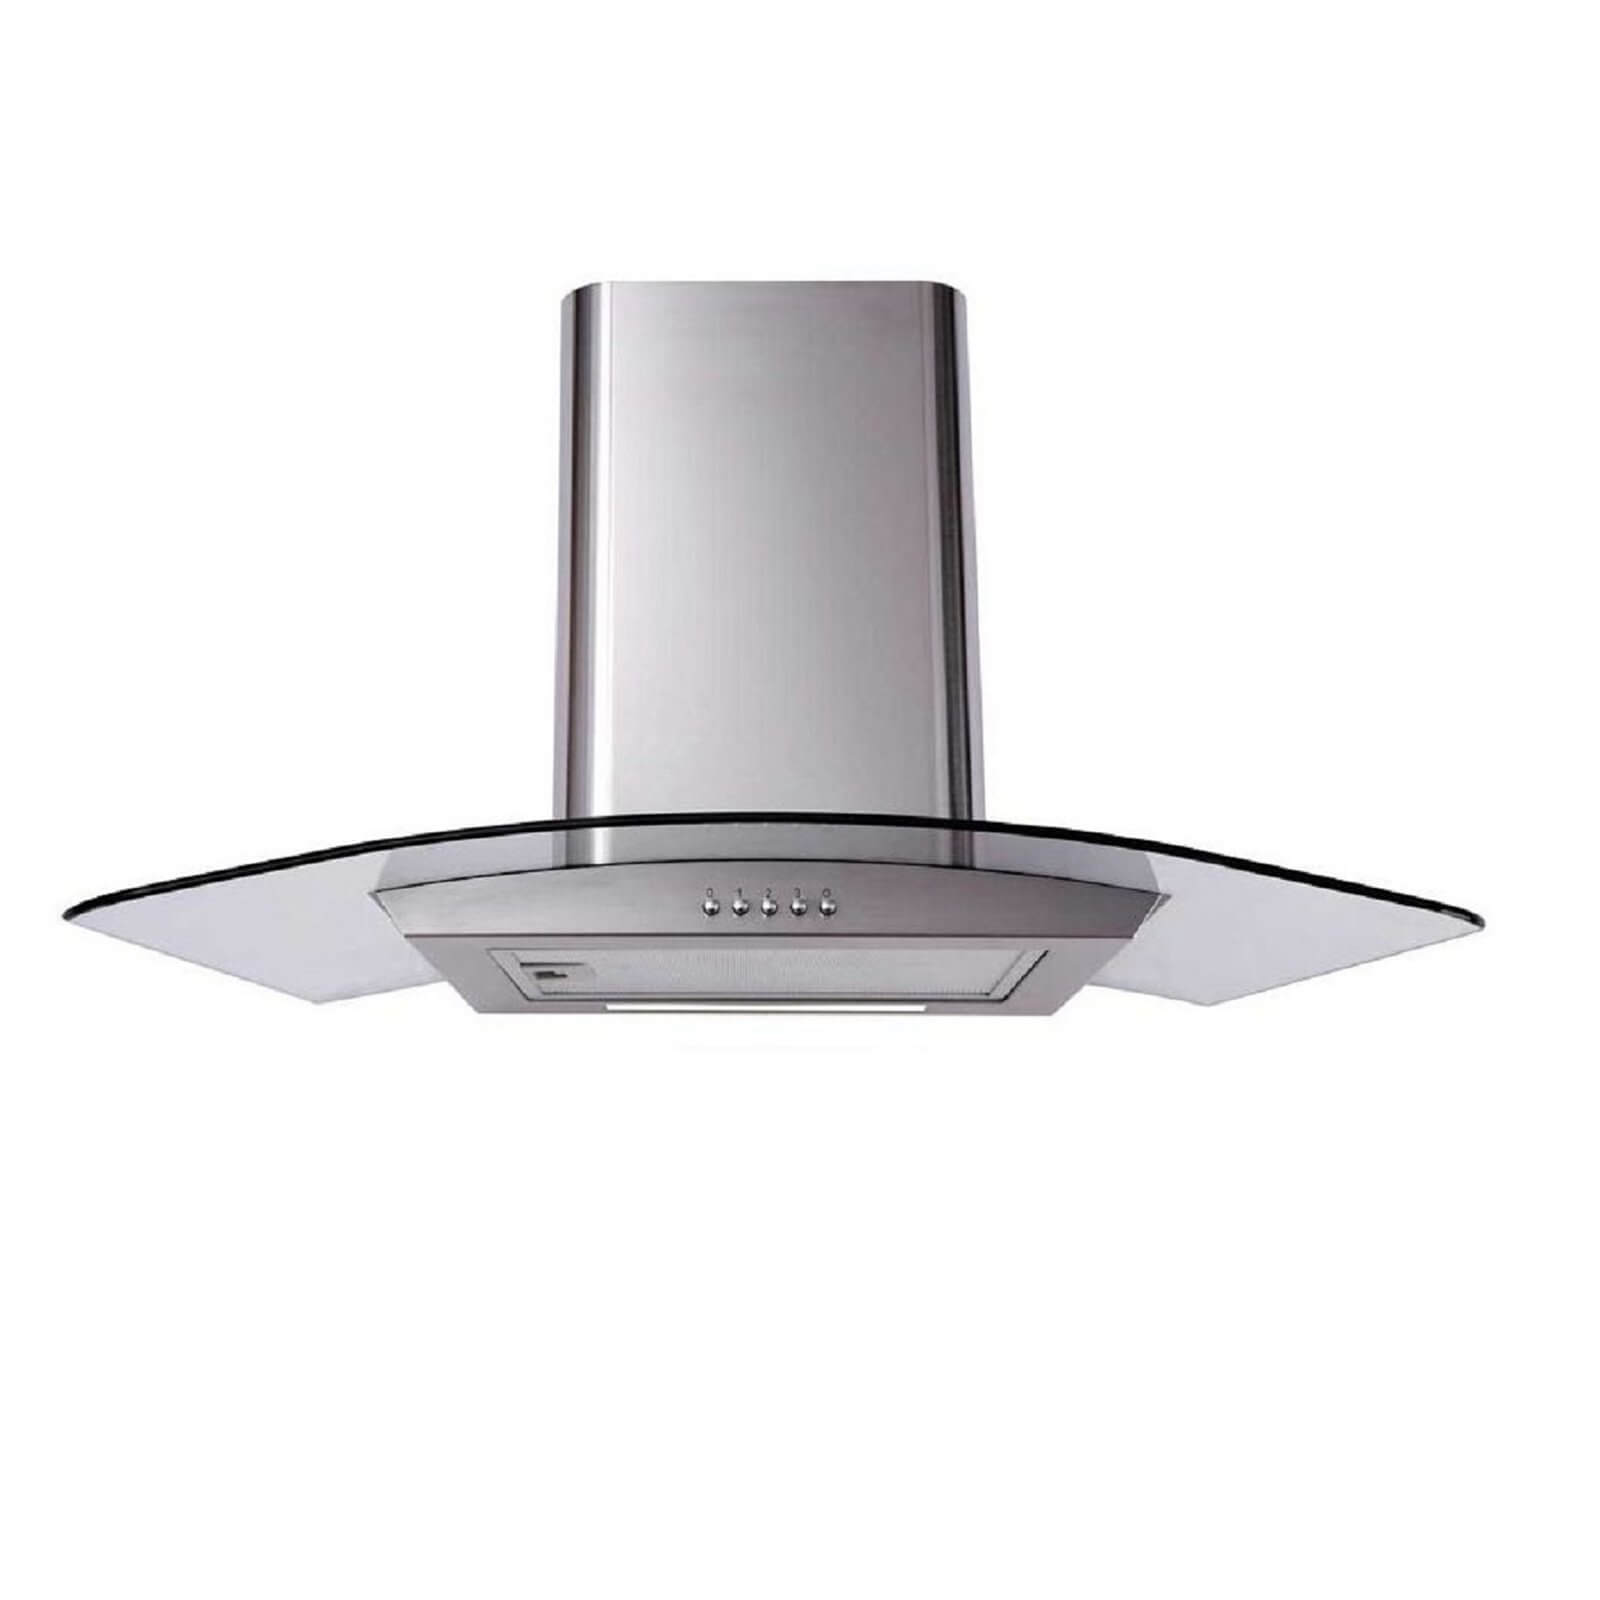 Matrix MEP901SS Curved Glass Chimney Cooker Hood - 90cm - Stainless Steel